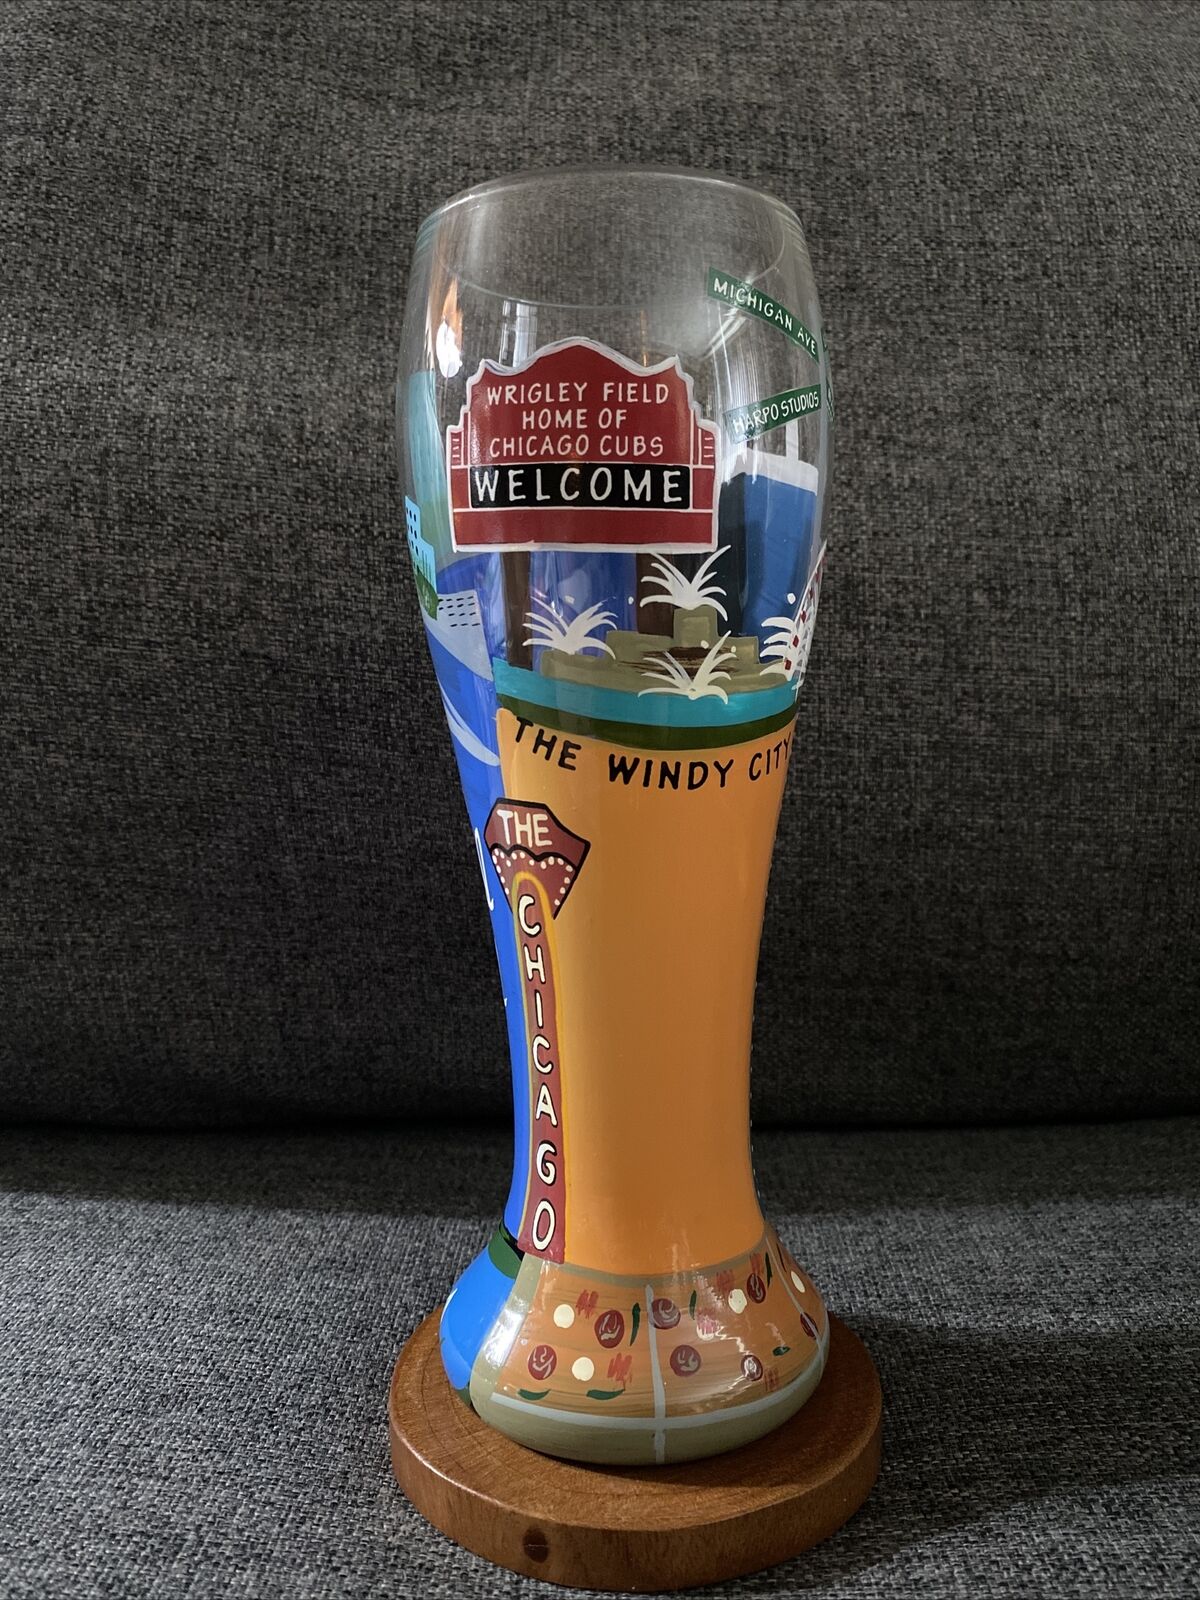 Lolita Hand Painted 22 oz Pilsner Beer Glass CHICAGO Wrigley Field